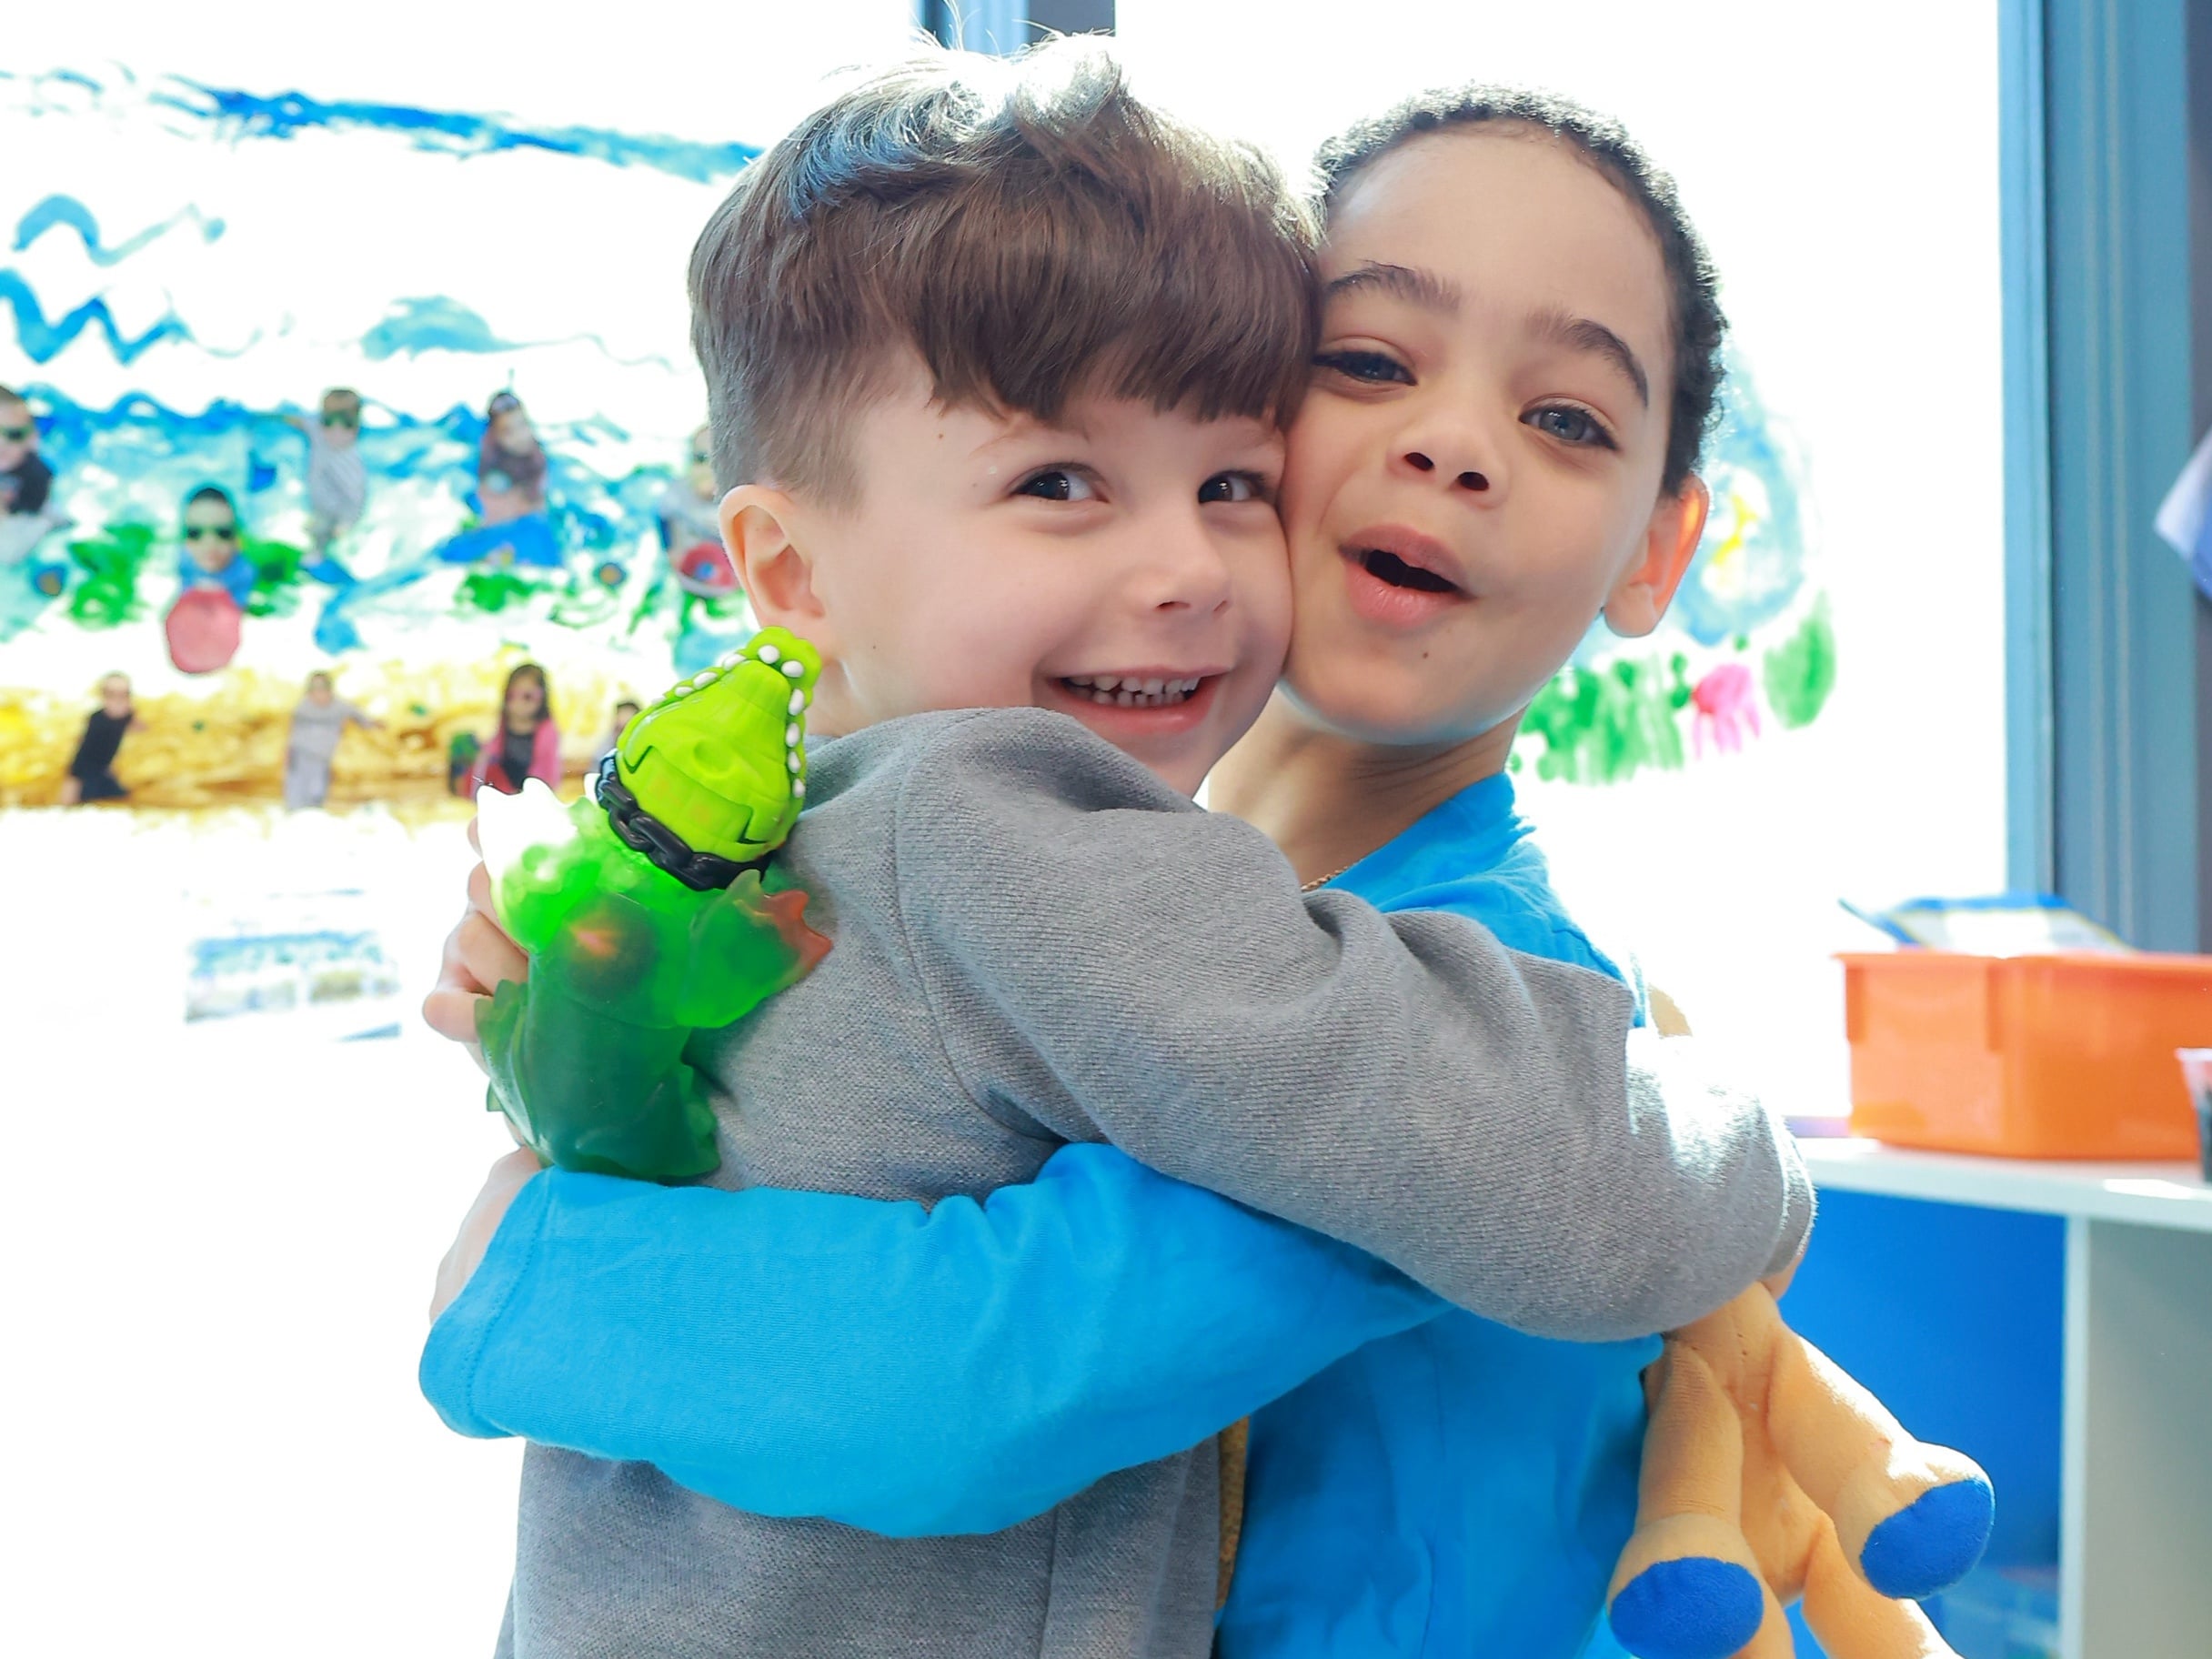 Two young boys hugging each other and sharing toys at Little Scholars Daycare.